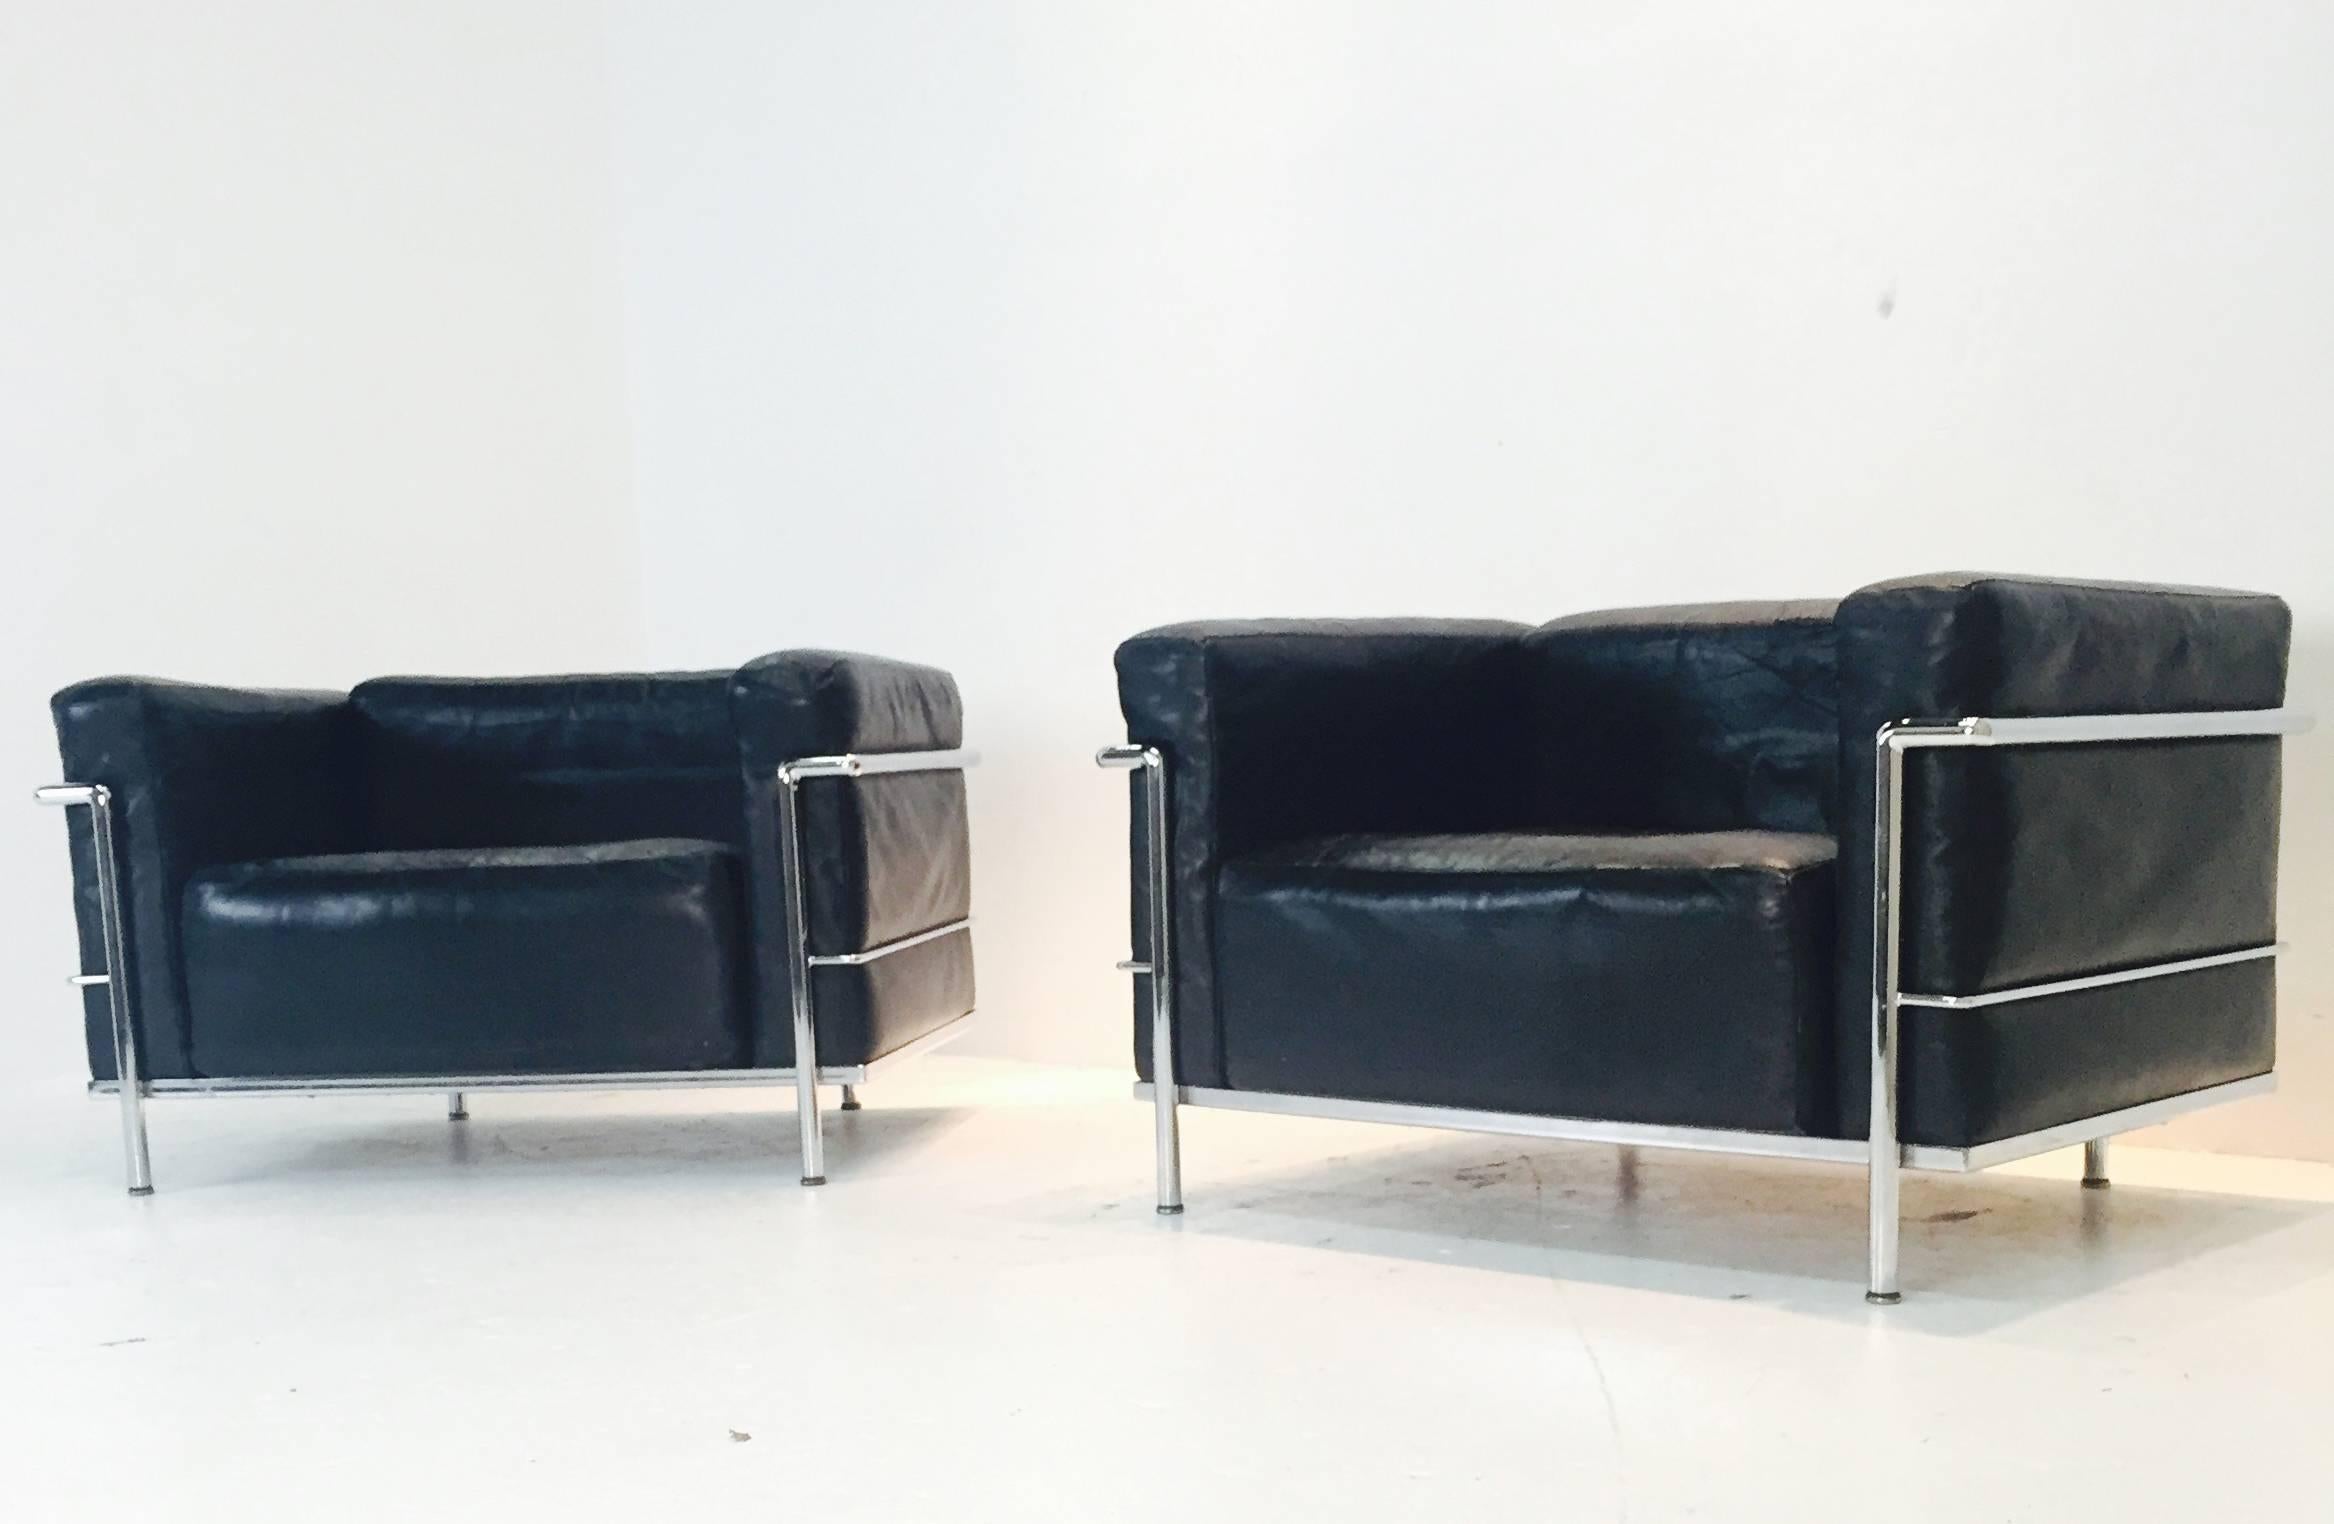 Pair LC-3 grand comfort lounge chairs by Le Corbusier. The leather seating has an aged look. The chairs are in good vintage condition with appropriate wear due to age. These chairs were made in the 1960s for Cassina originally designed in 1928